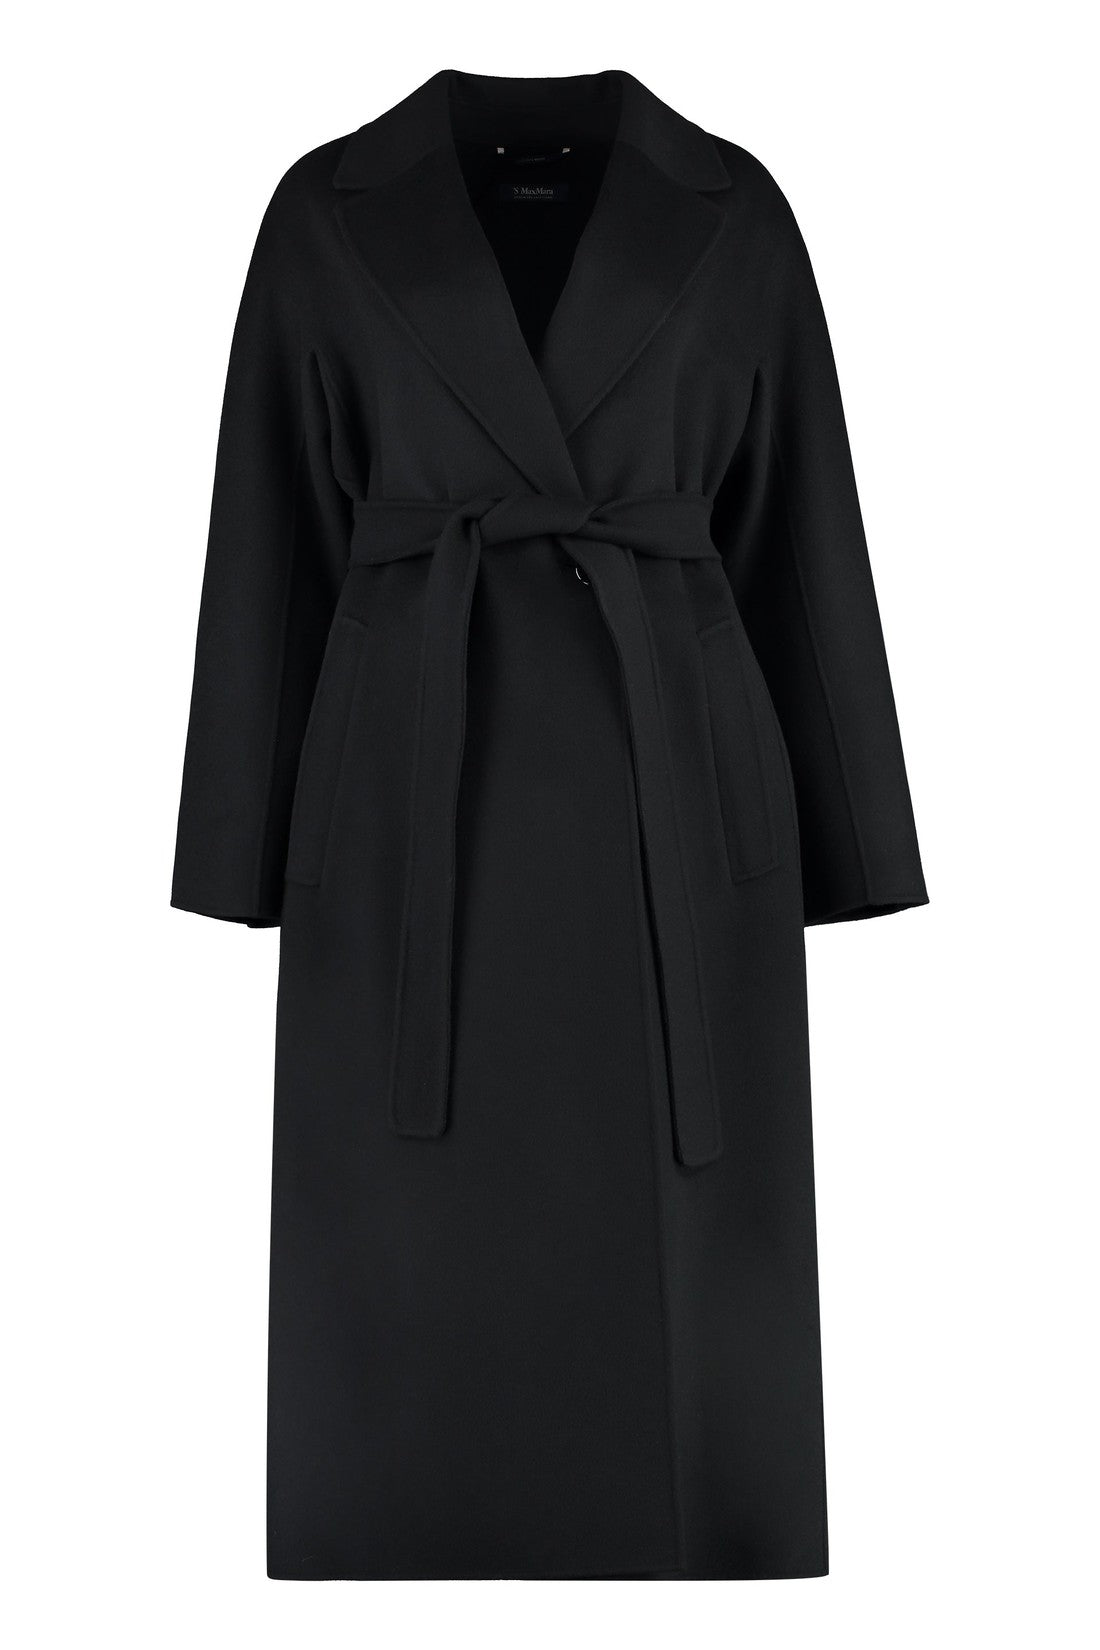 S MAX MARA-OUTLET-SALE-Eliot double-breasted coat-ARCHIVIST